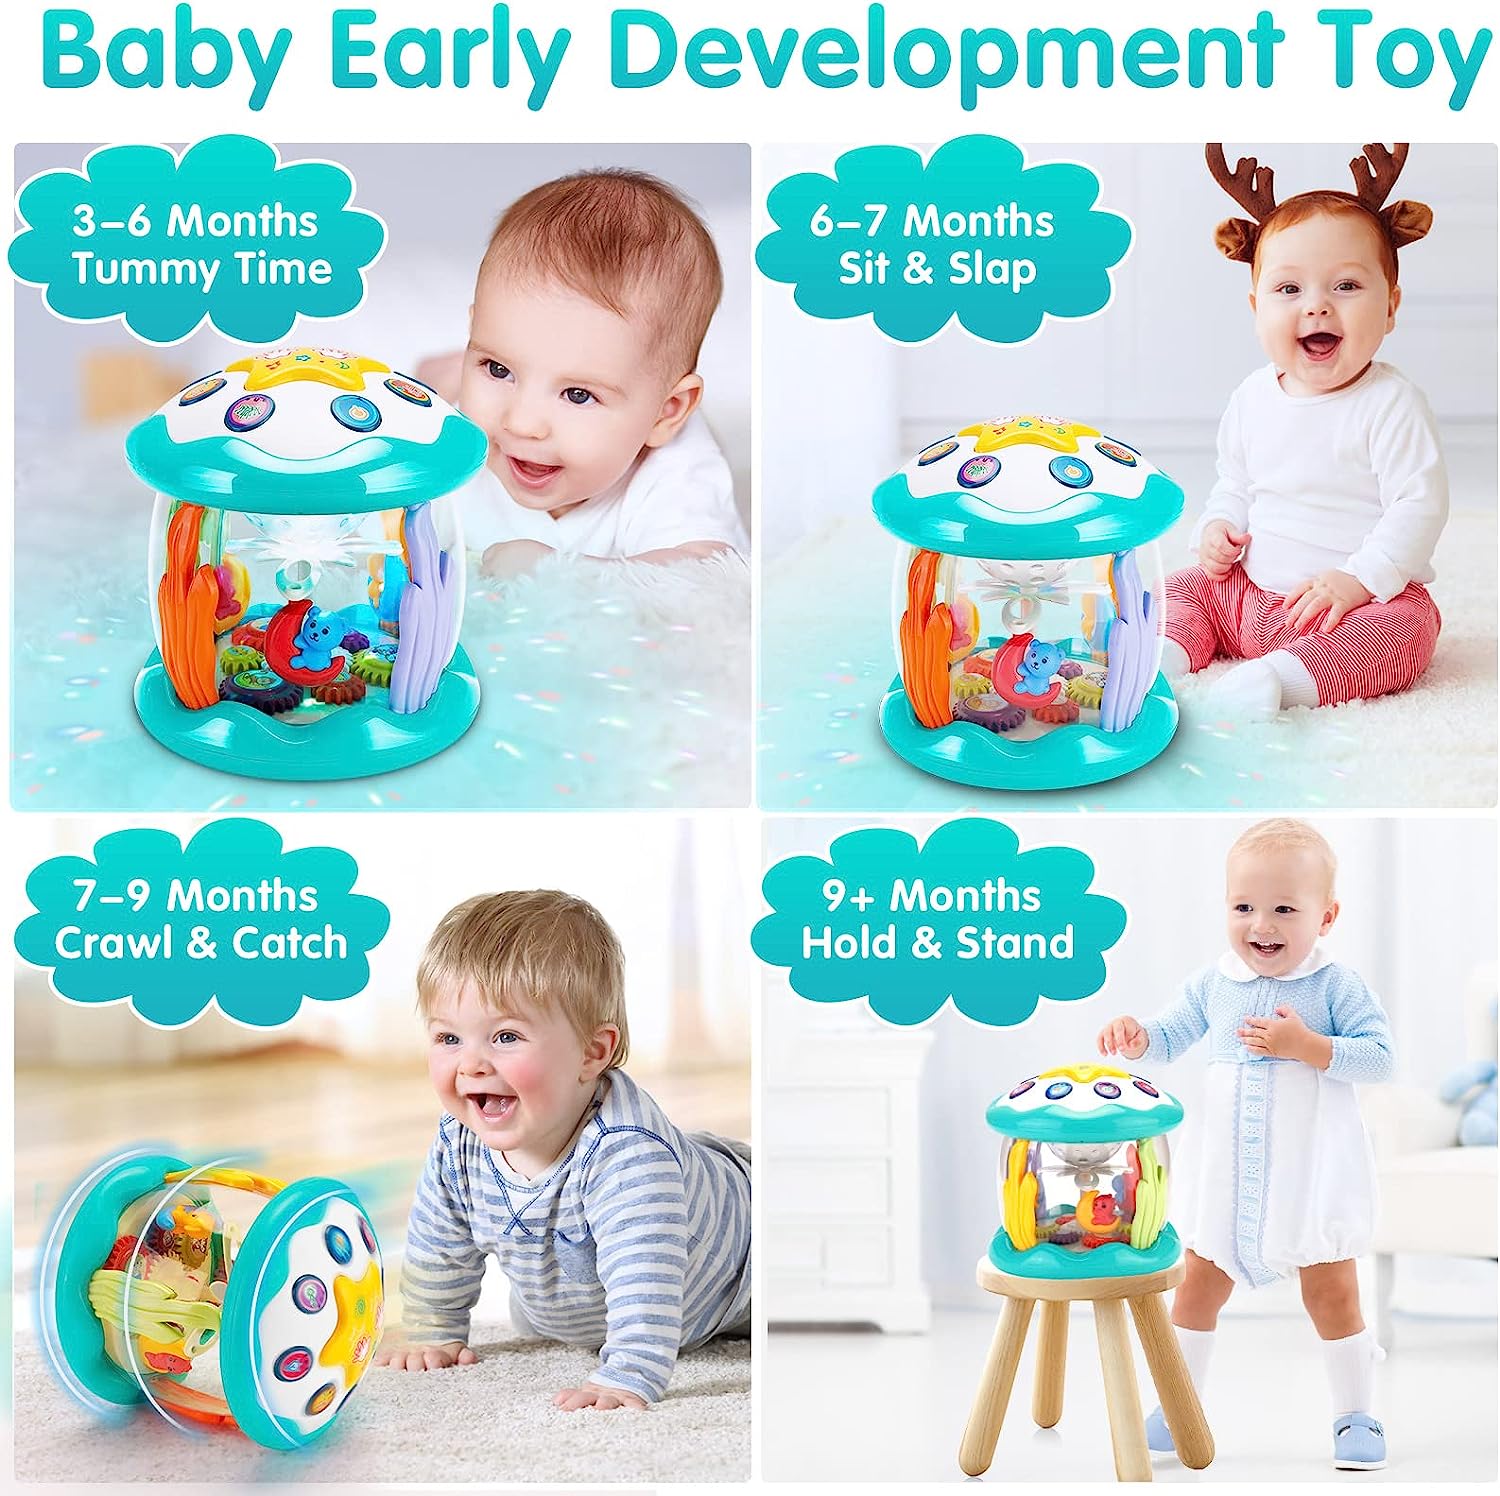 Baby Toys 6 to 12 Months - Sensory Musical Light Up Toy, Learning Educational Crawling Toy for Infant 12-18 Month, Rotating Projector Toy Gift for Toddlers 1 2 3 Year Old Boy Girl Kid